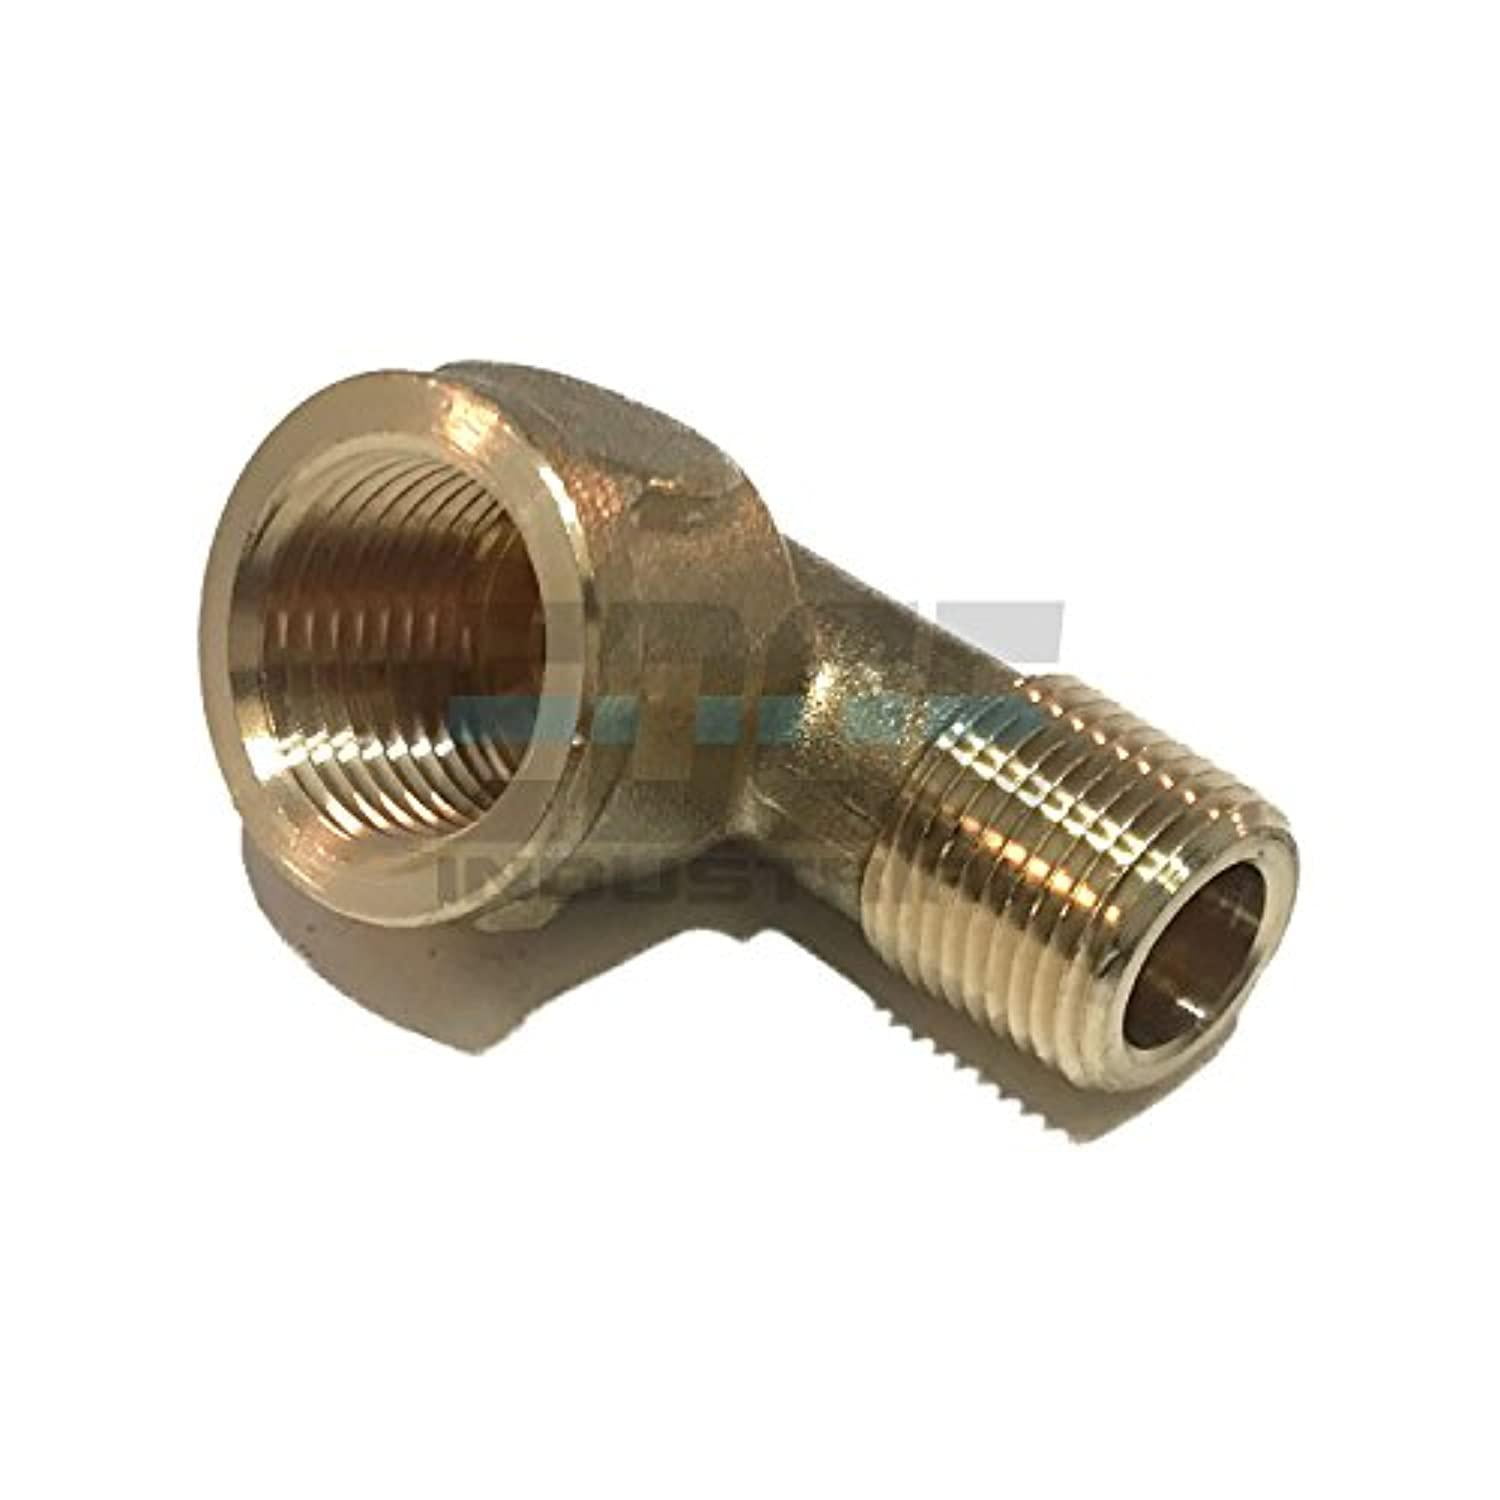 2 Pcs 3/8 NPT Female Pipe ELBOW Brass Fitting Equal Fuel Air Water Oil Gas 